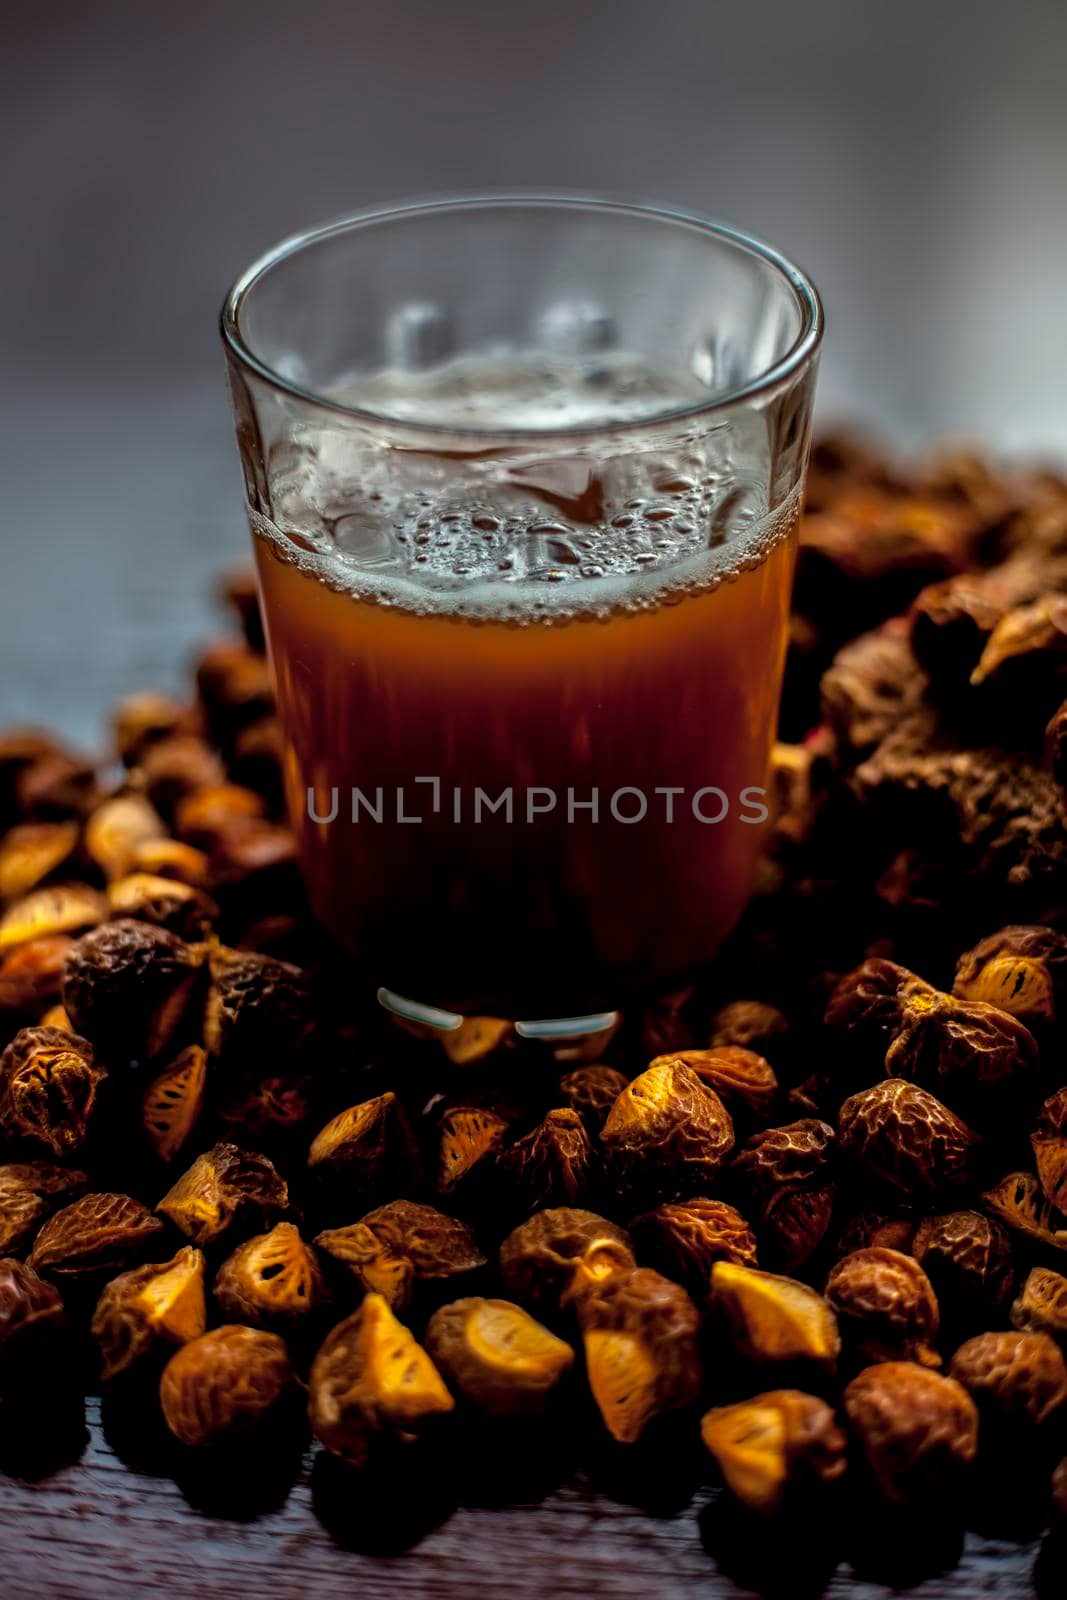 Close up shot of fresh raw soapnut on the brown surface along with its solution or liquid in a glass alongside it.